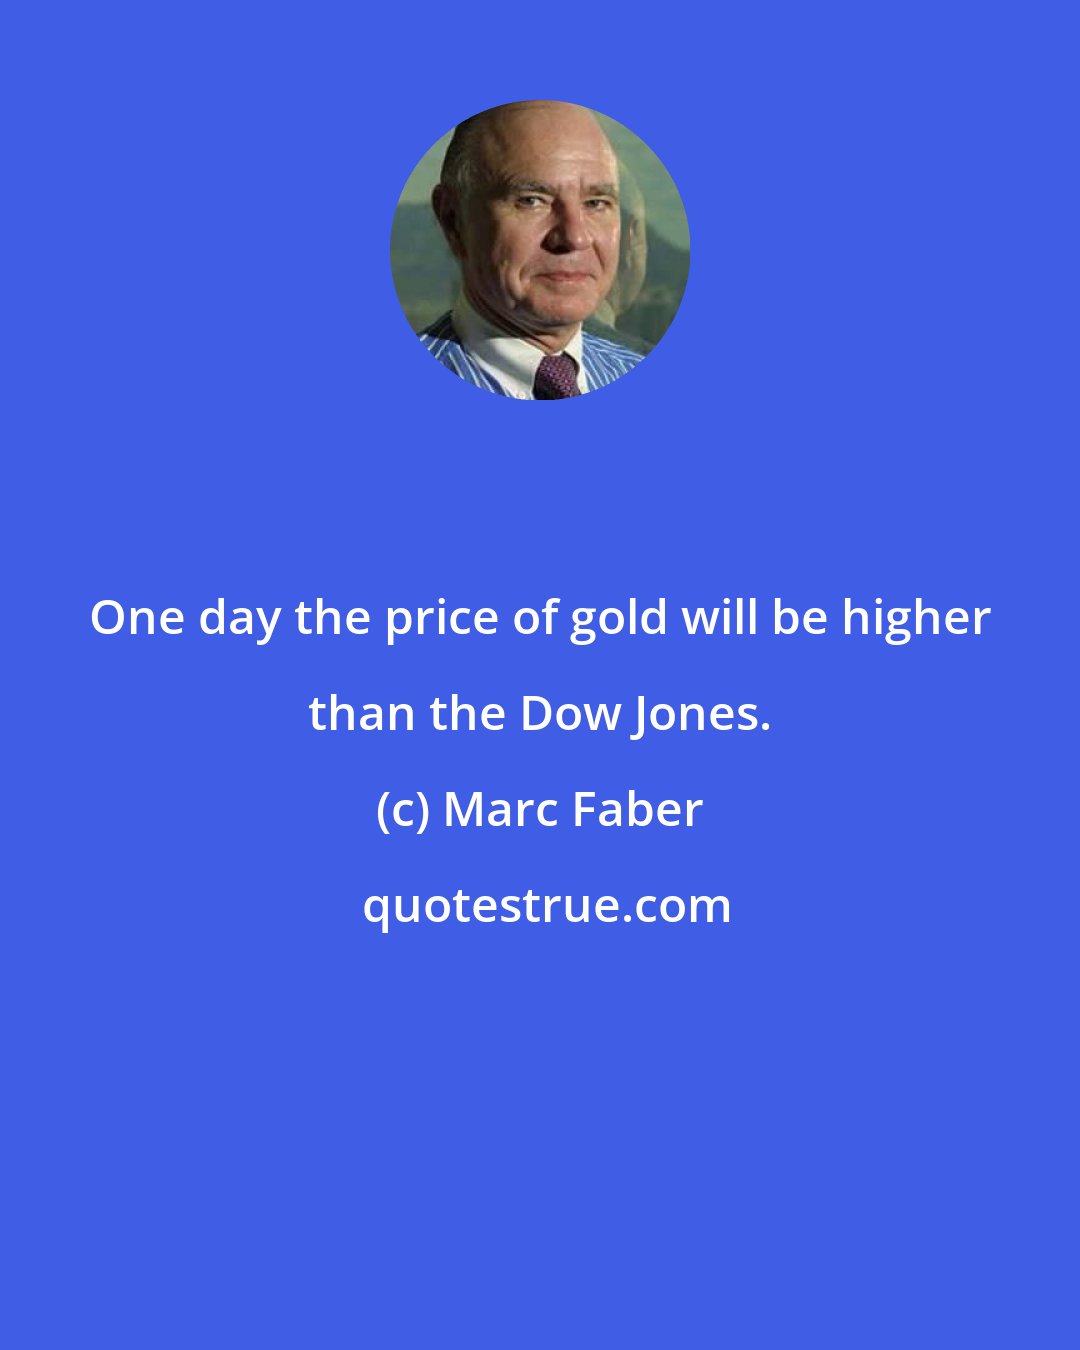 Marc Faber: One day the price of gold will be higher than the Dow Jones.